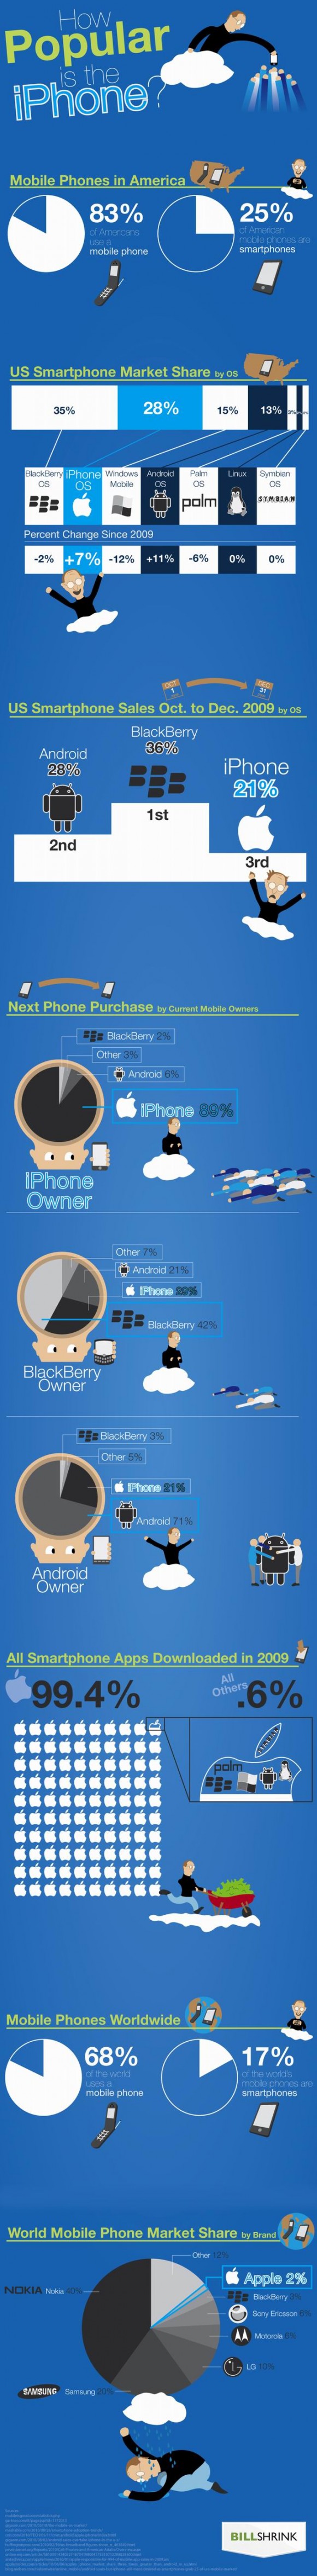 how popular is the iphone